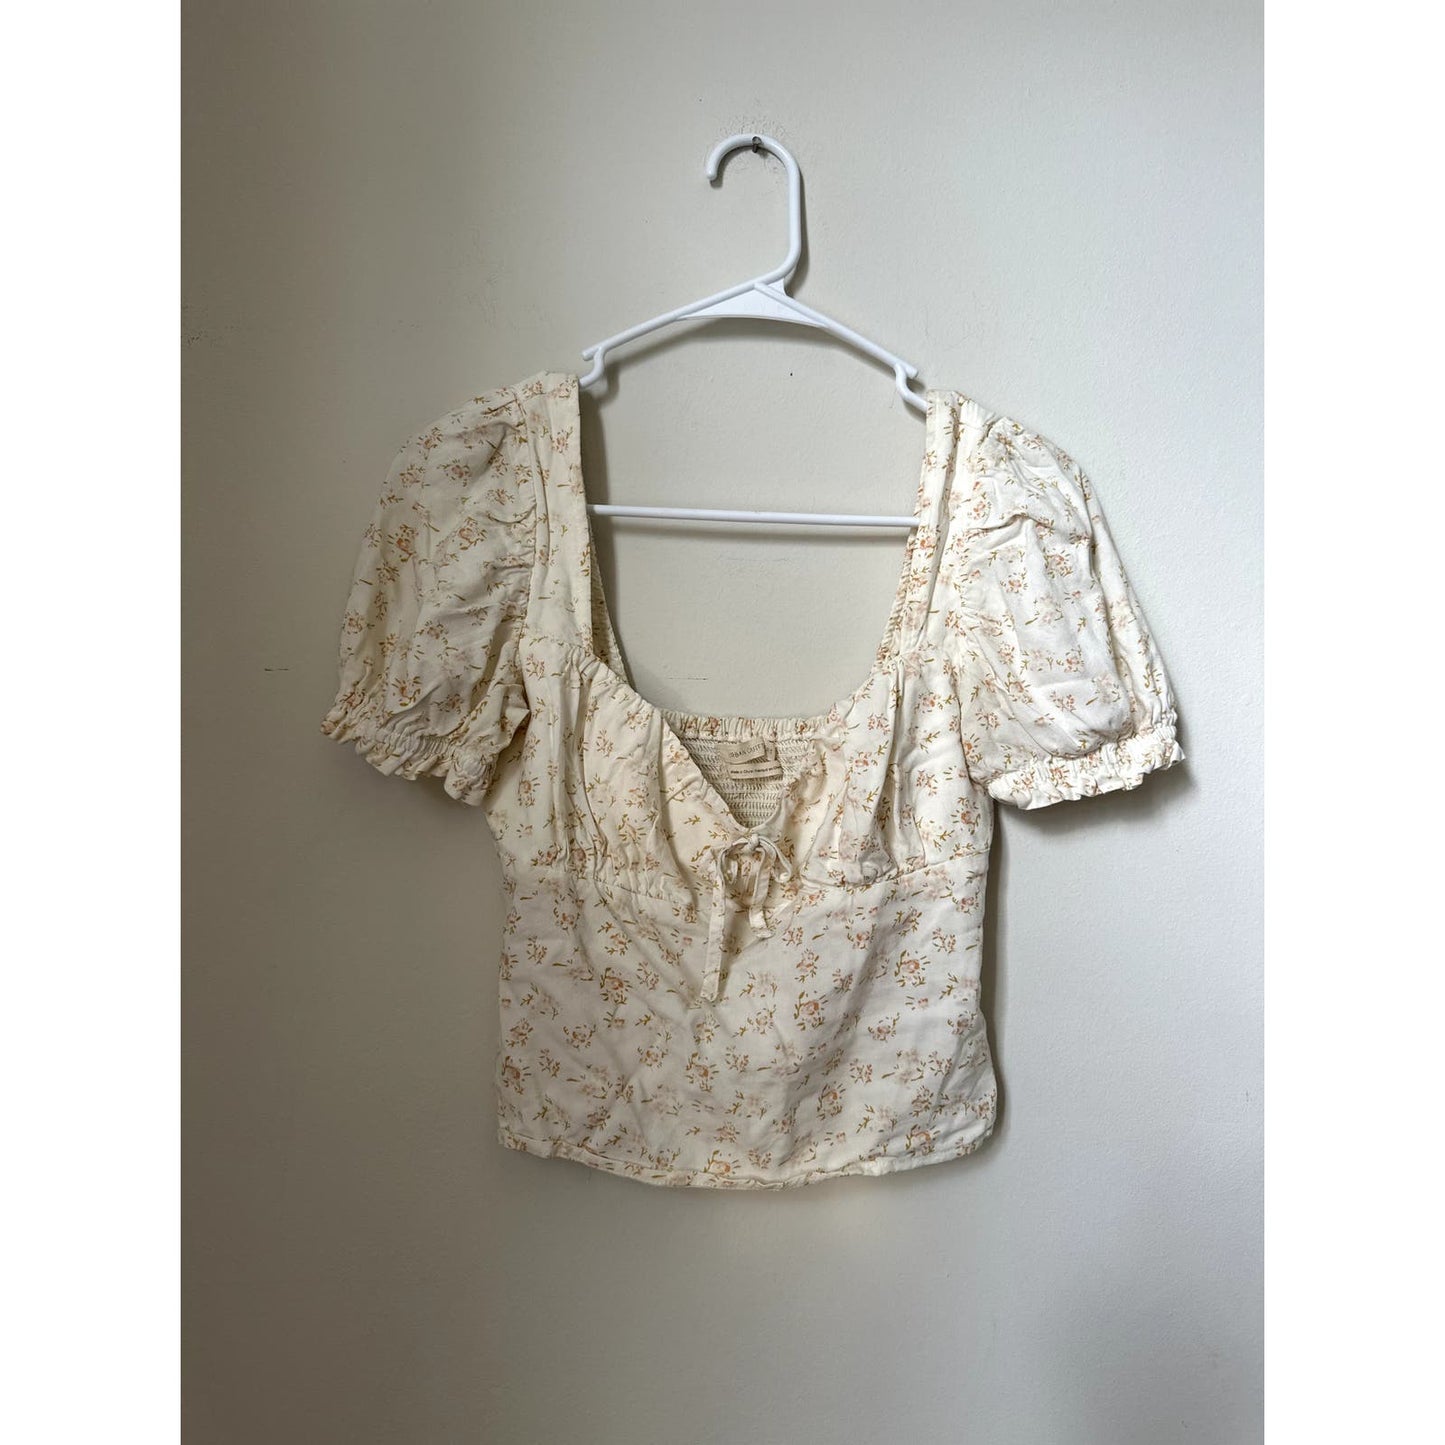 Urban Outfitters Dainty Floral Top, Size Small